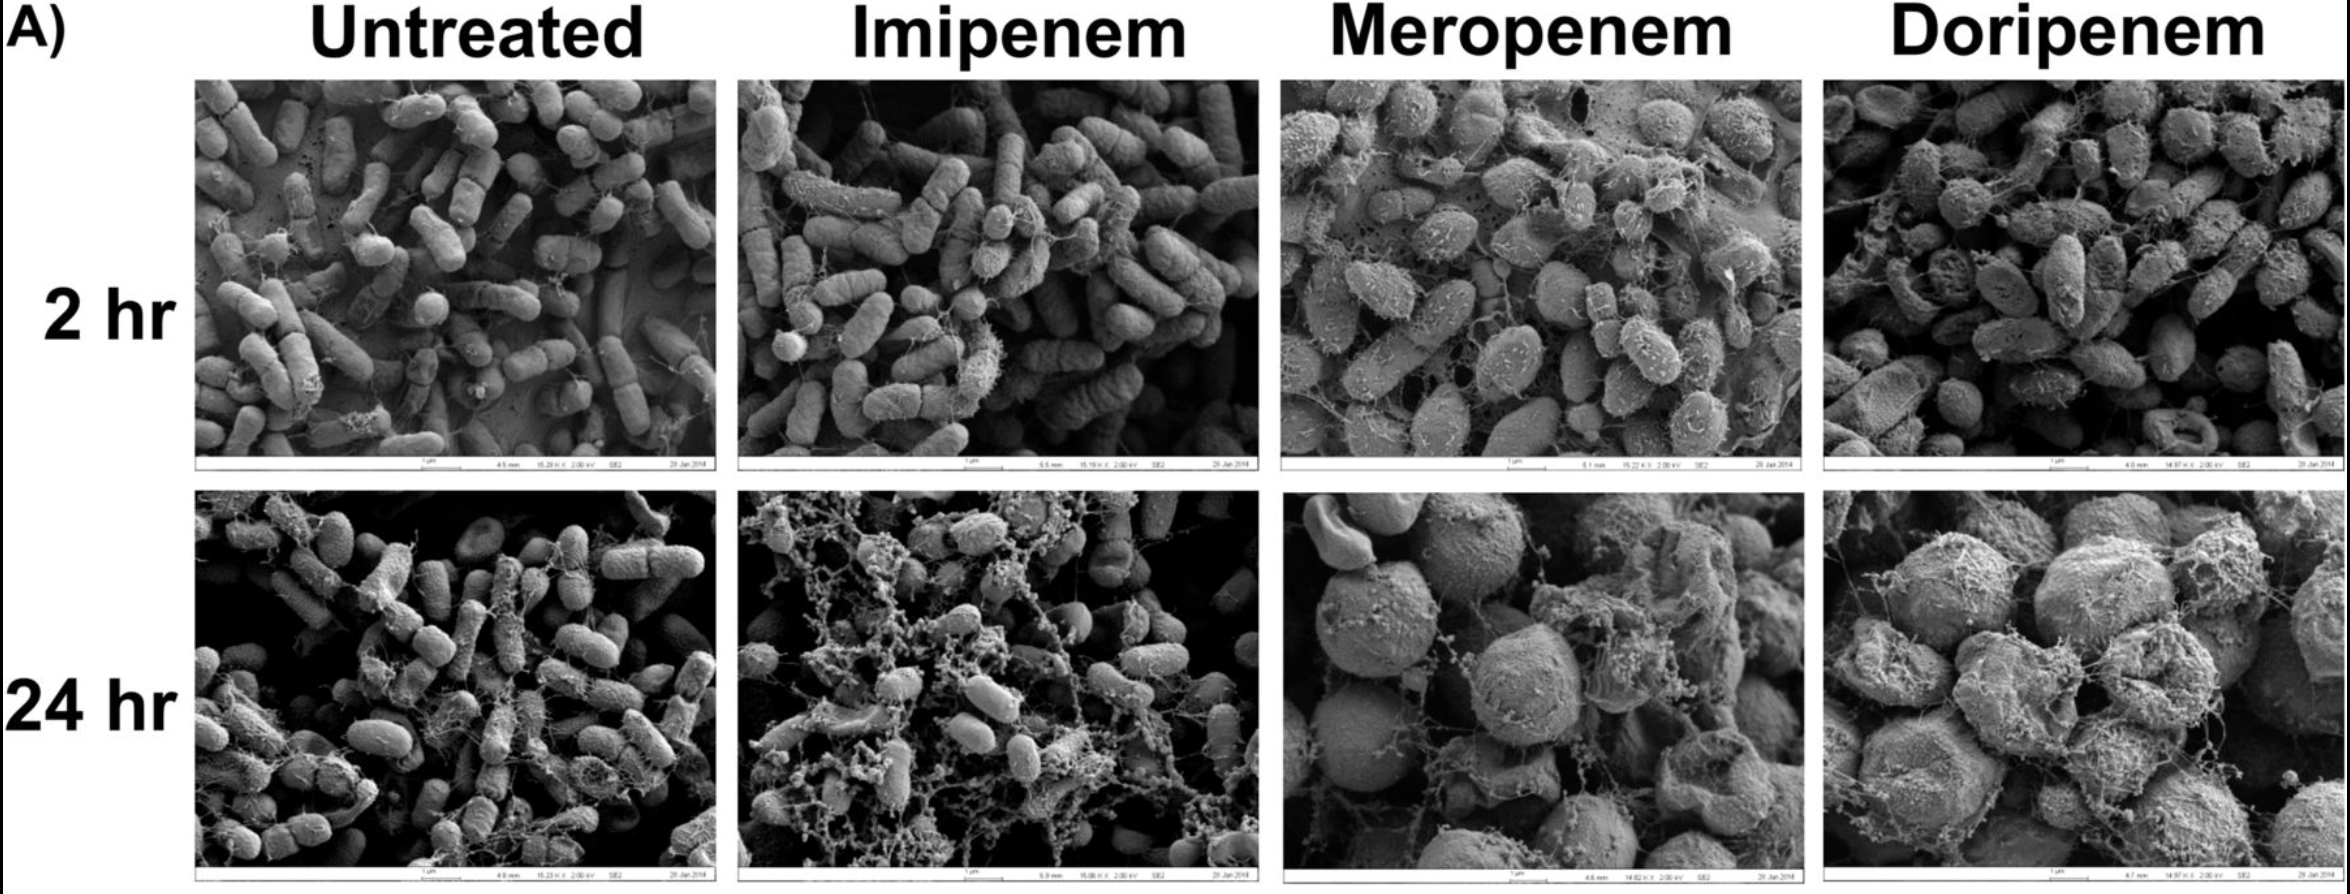 Sublethal Concentrations of Carbapenems Alter Cell Morphology and Genomic Expression of <i>Klebsiella pneumoniae</i> Biofilms